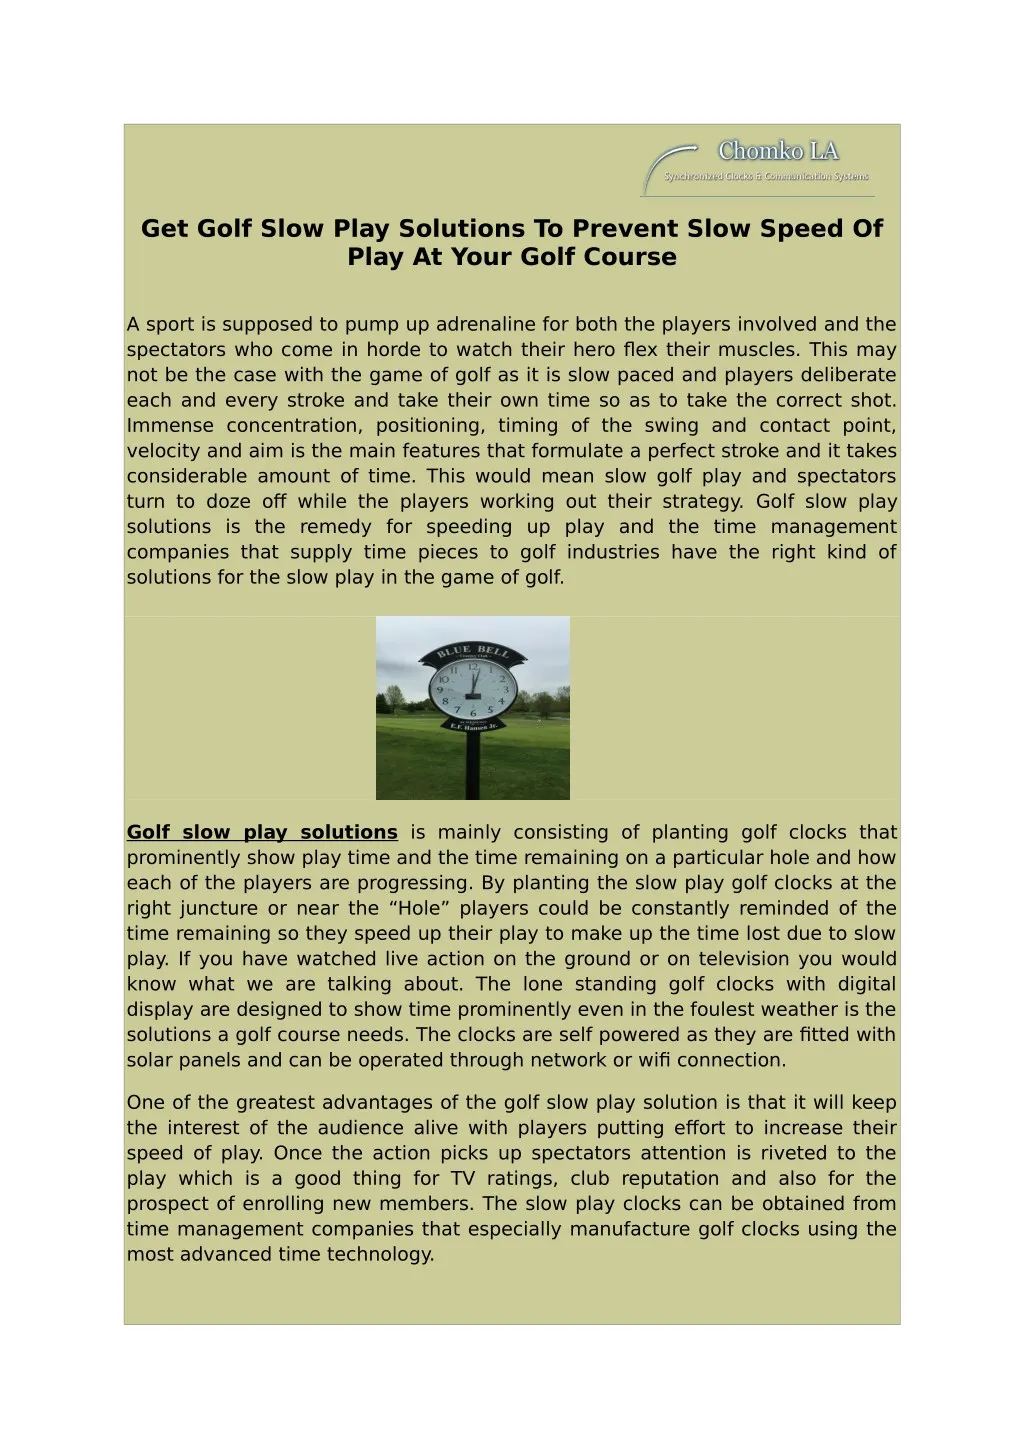 get golf slow play solutions to prevent slow